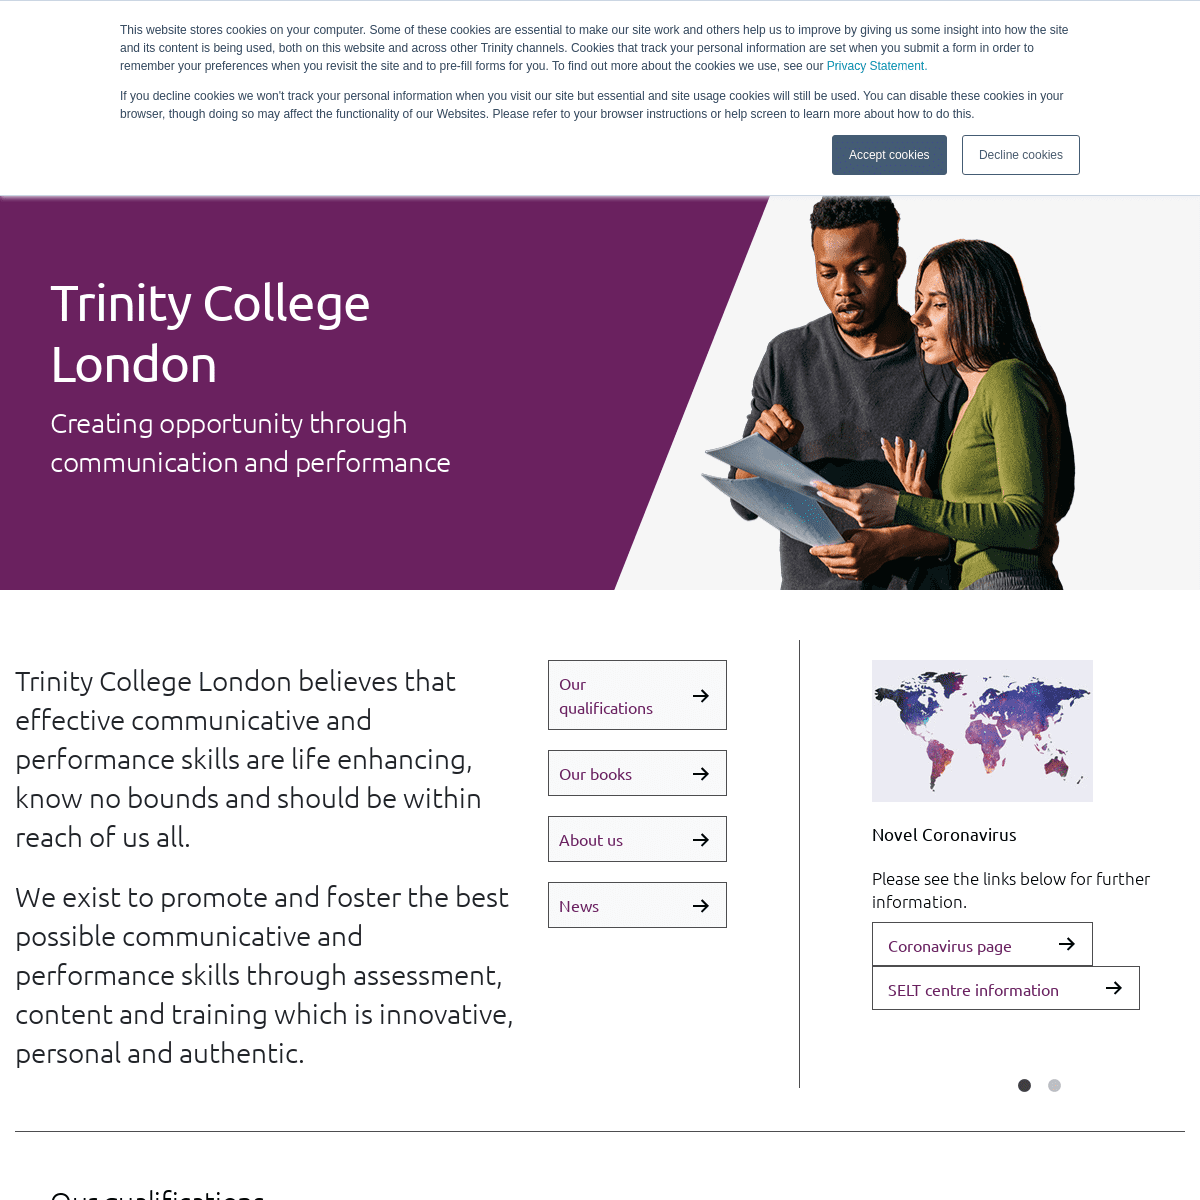 A complete backup of https://trinitycollege.com